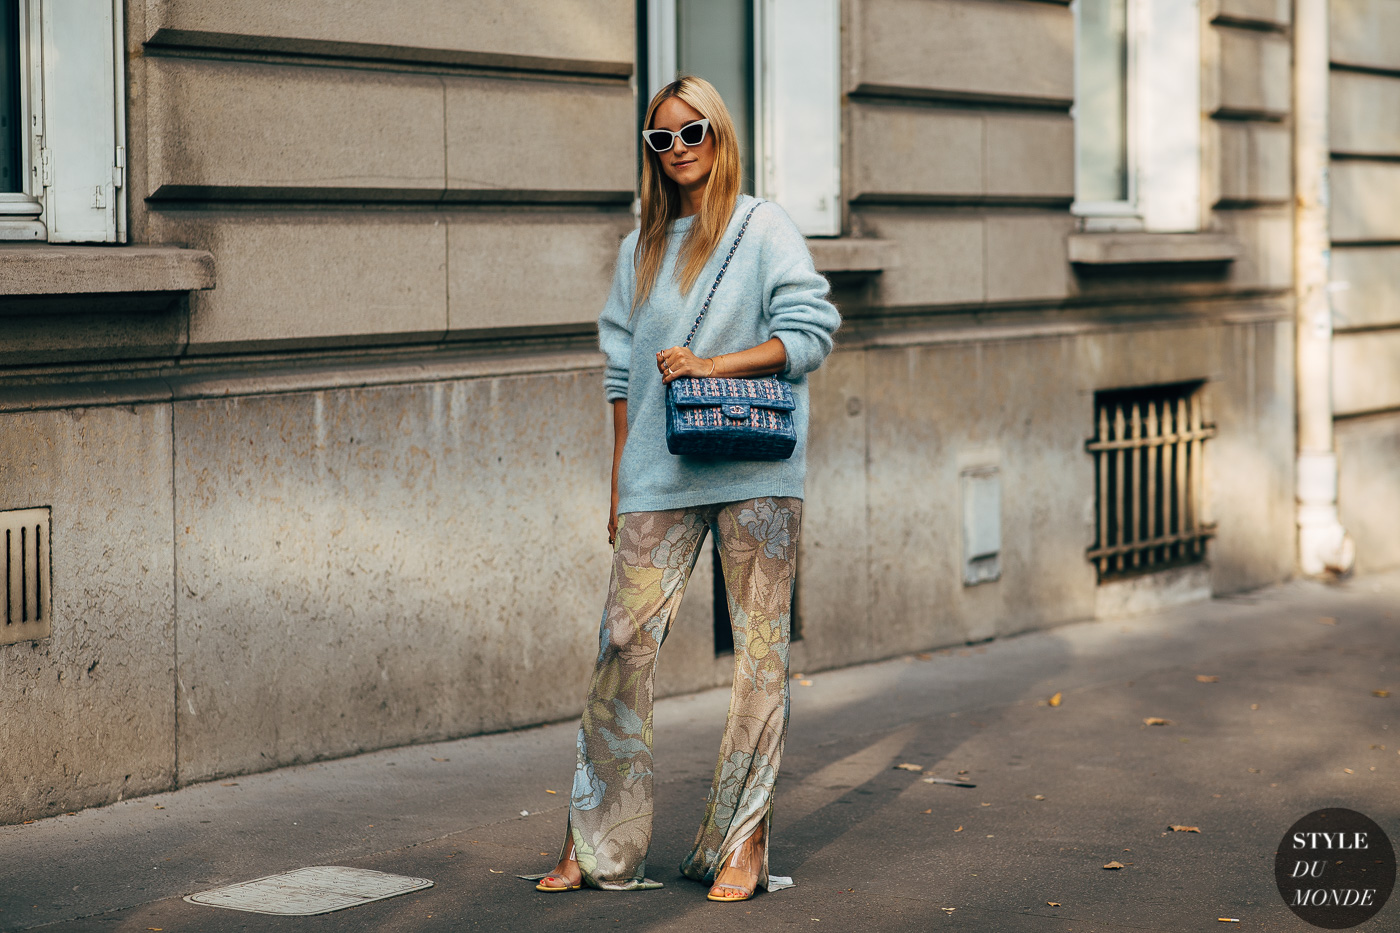 Charlotte Groeneveld by STYLEDUMONDE Street Style Fashion Photography20180928_48A3558